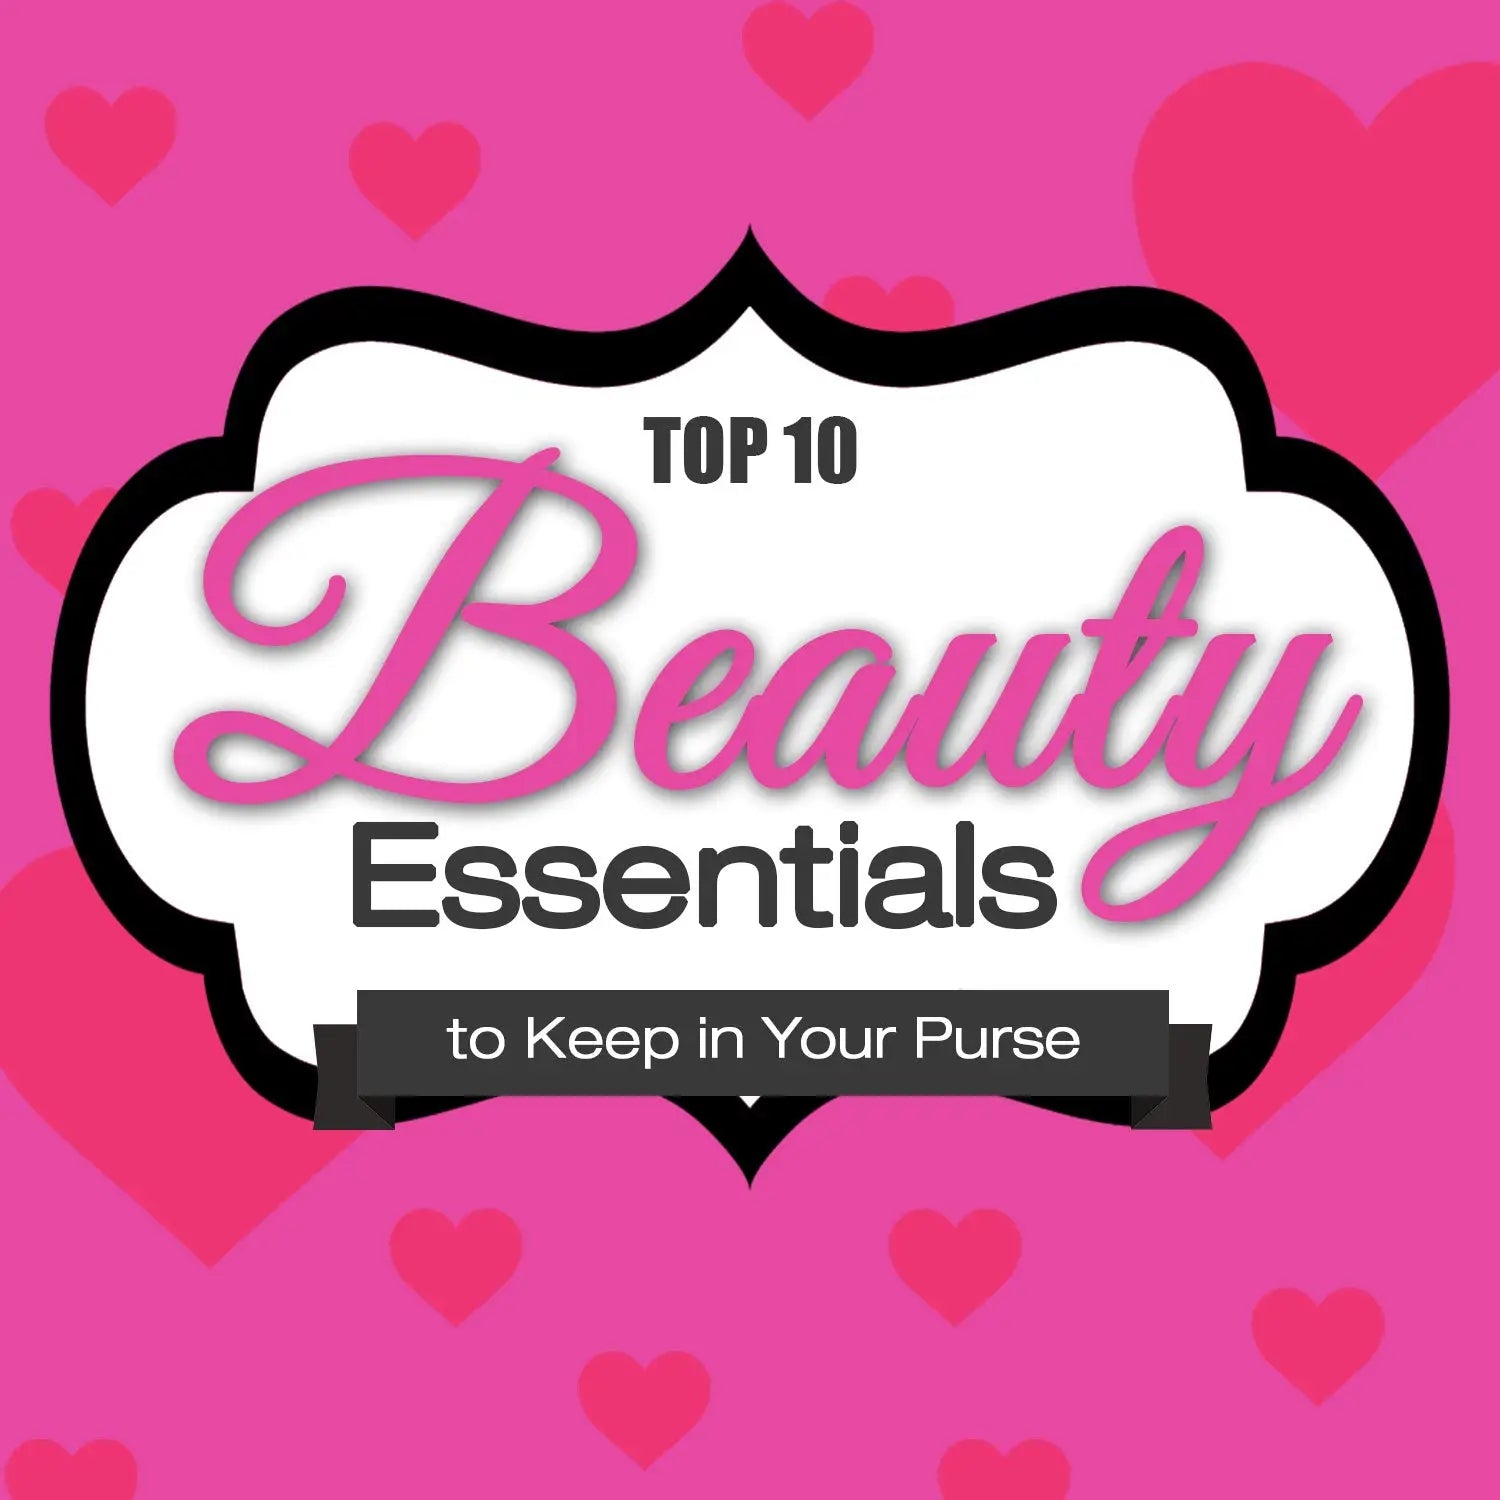 BEAUTY ESSENTIALS TO KEEP IN YOUR PURSE THIS VALENTINE’S DAY